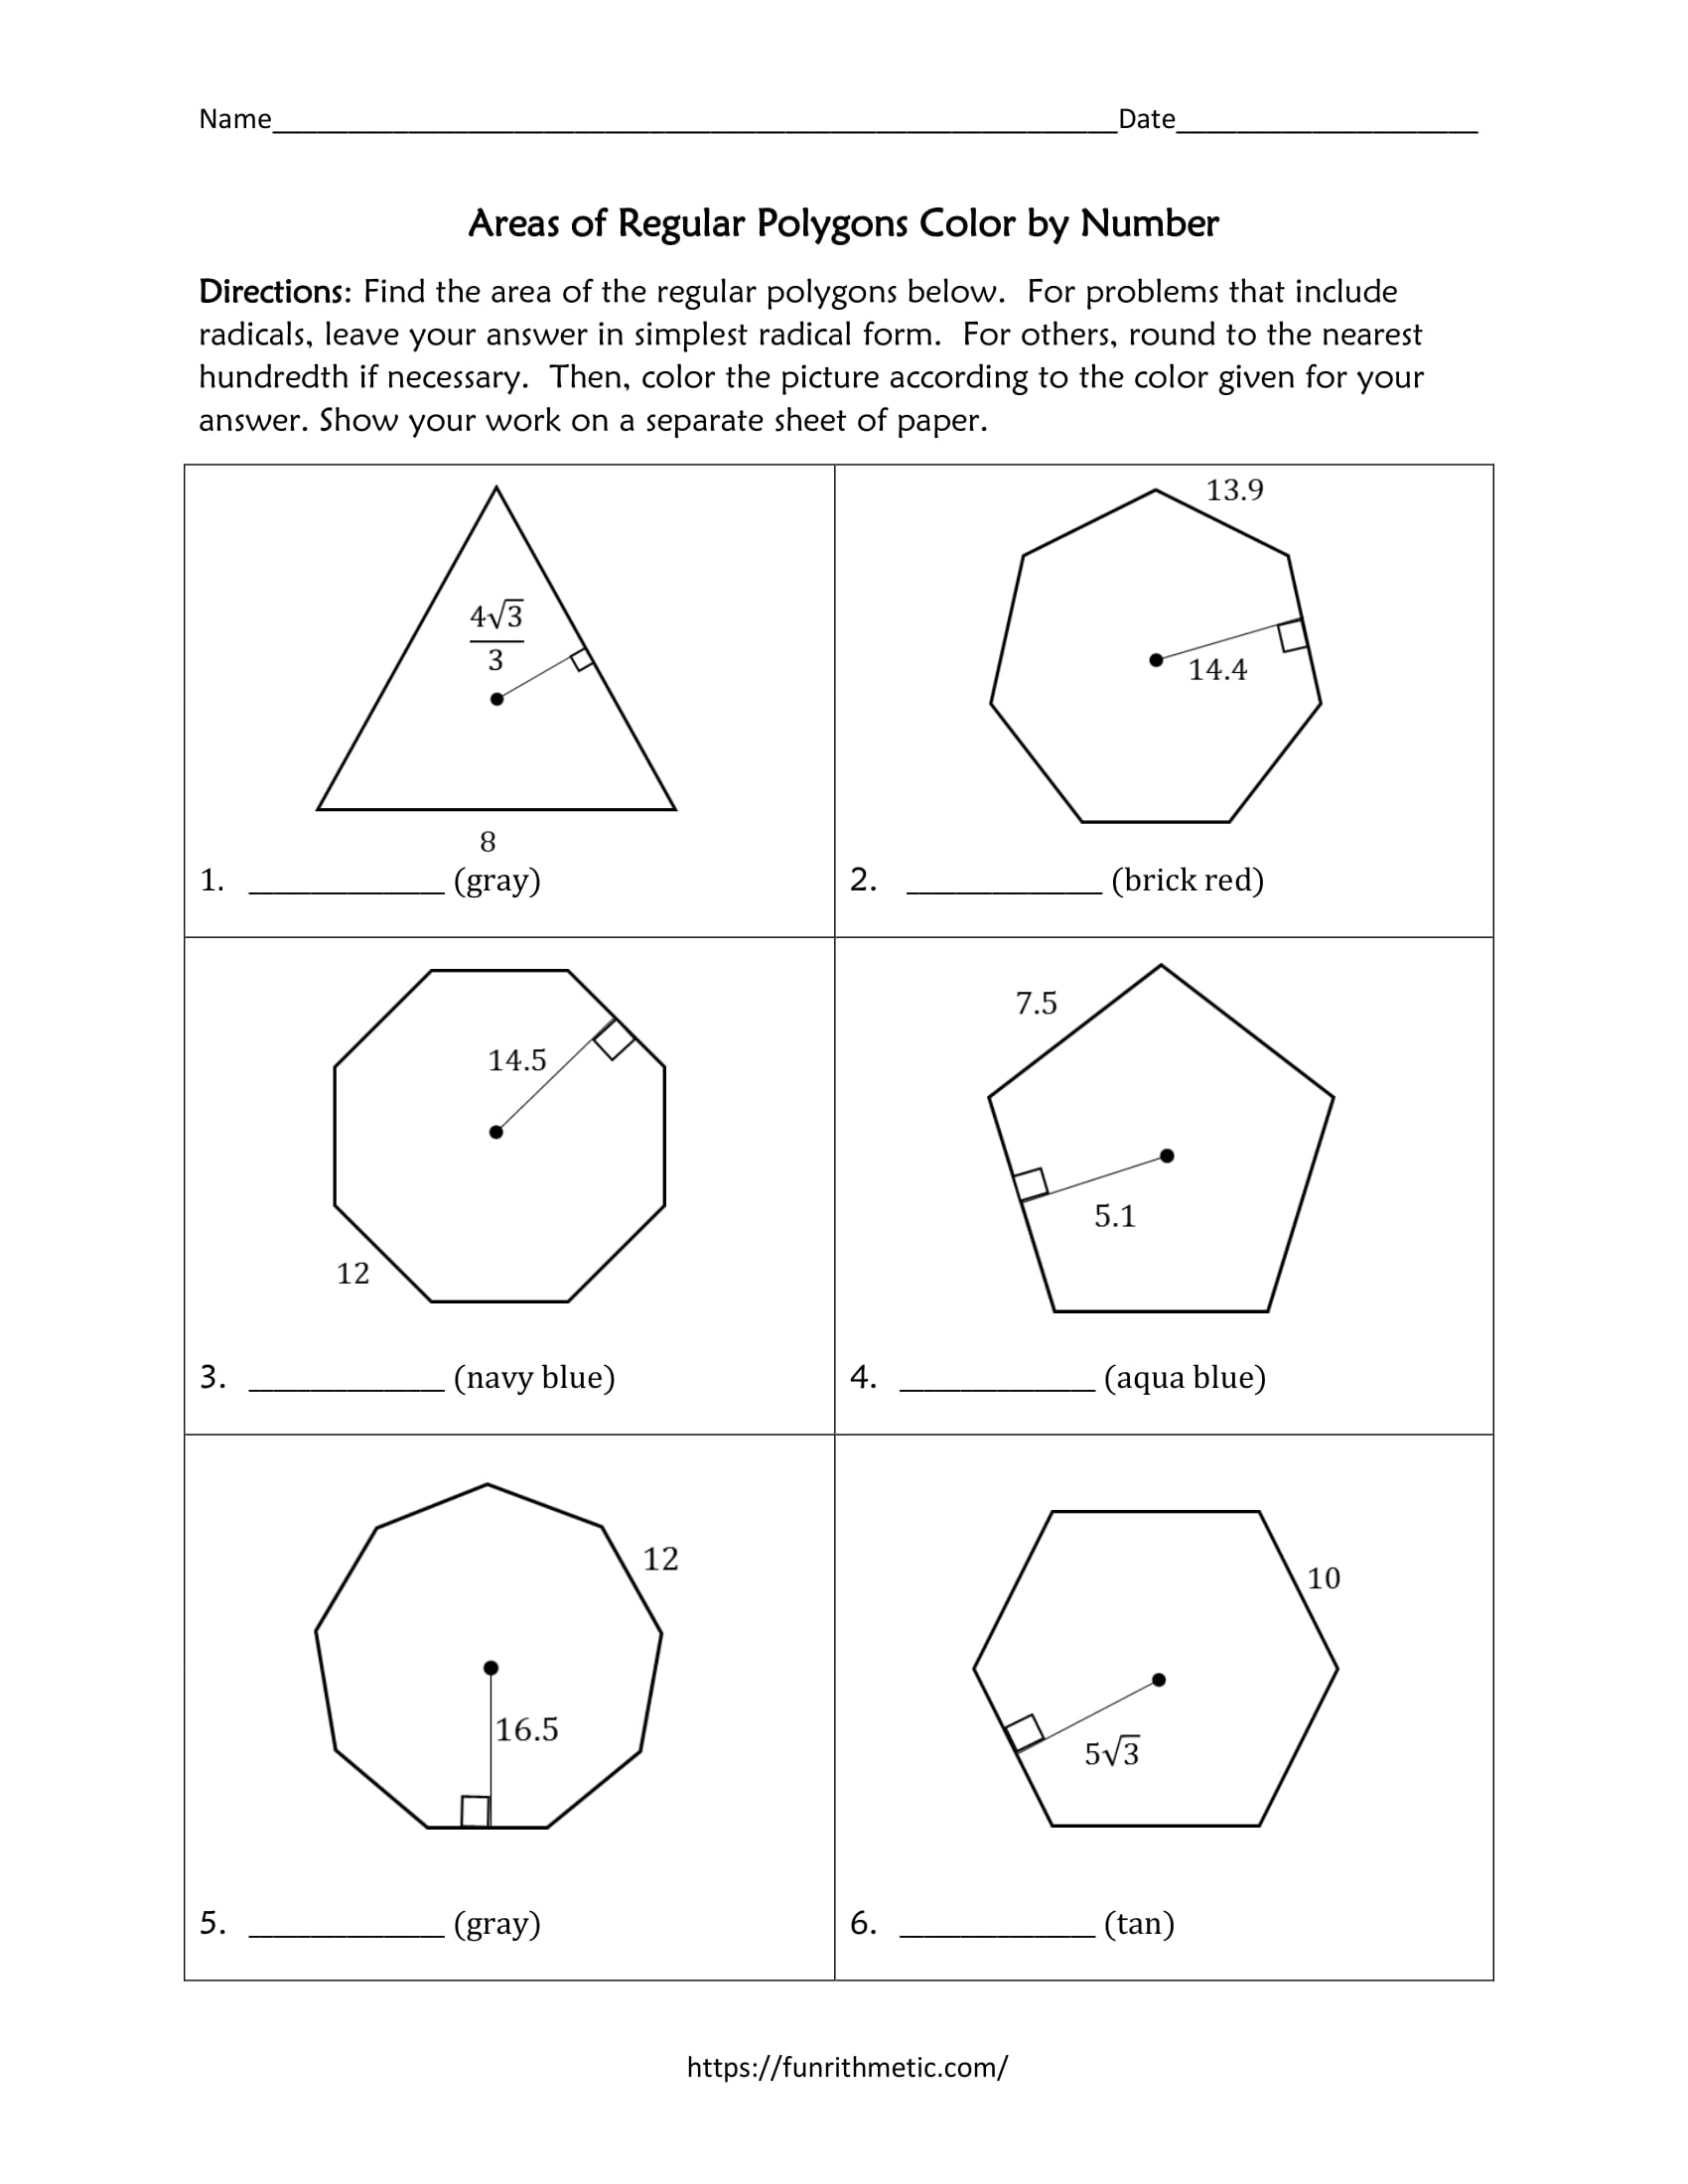 Areas of Regular Polygons Color by Number Inside Area Of Regular Polygons Worksheet